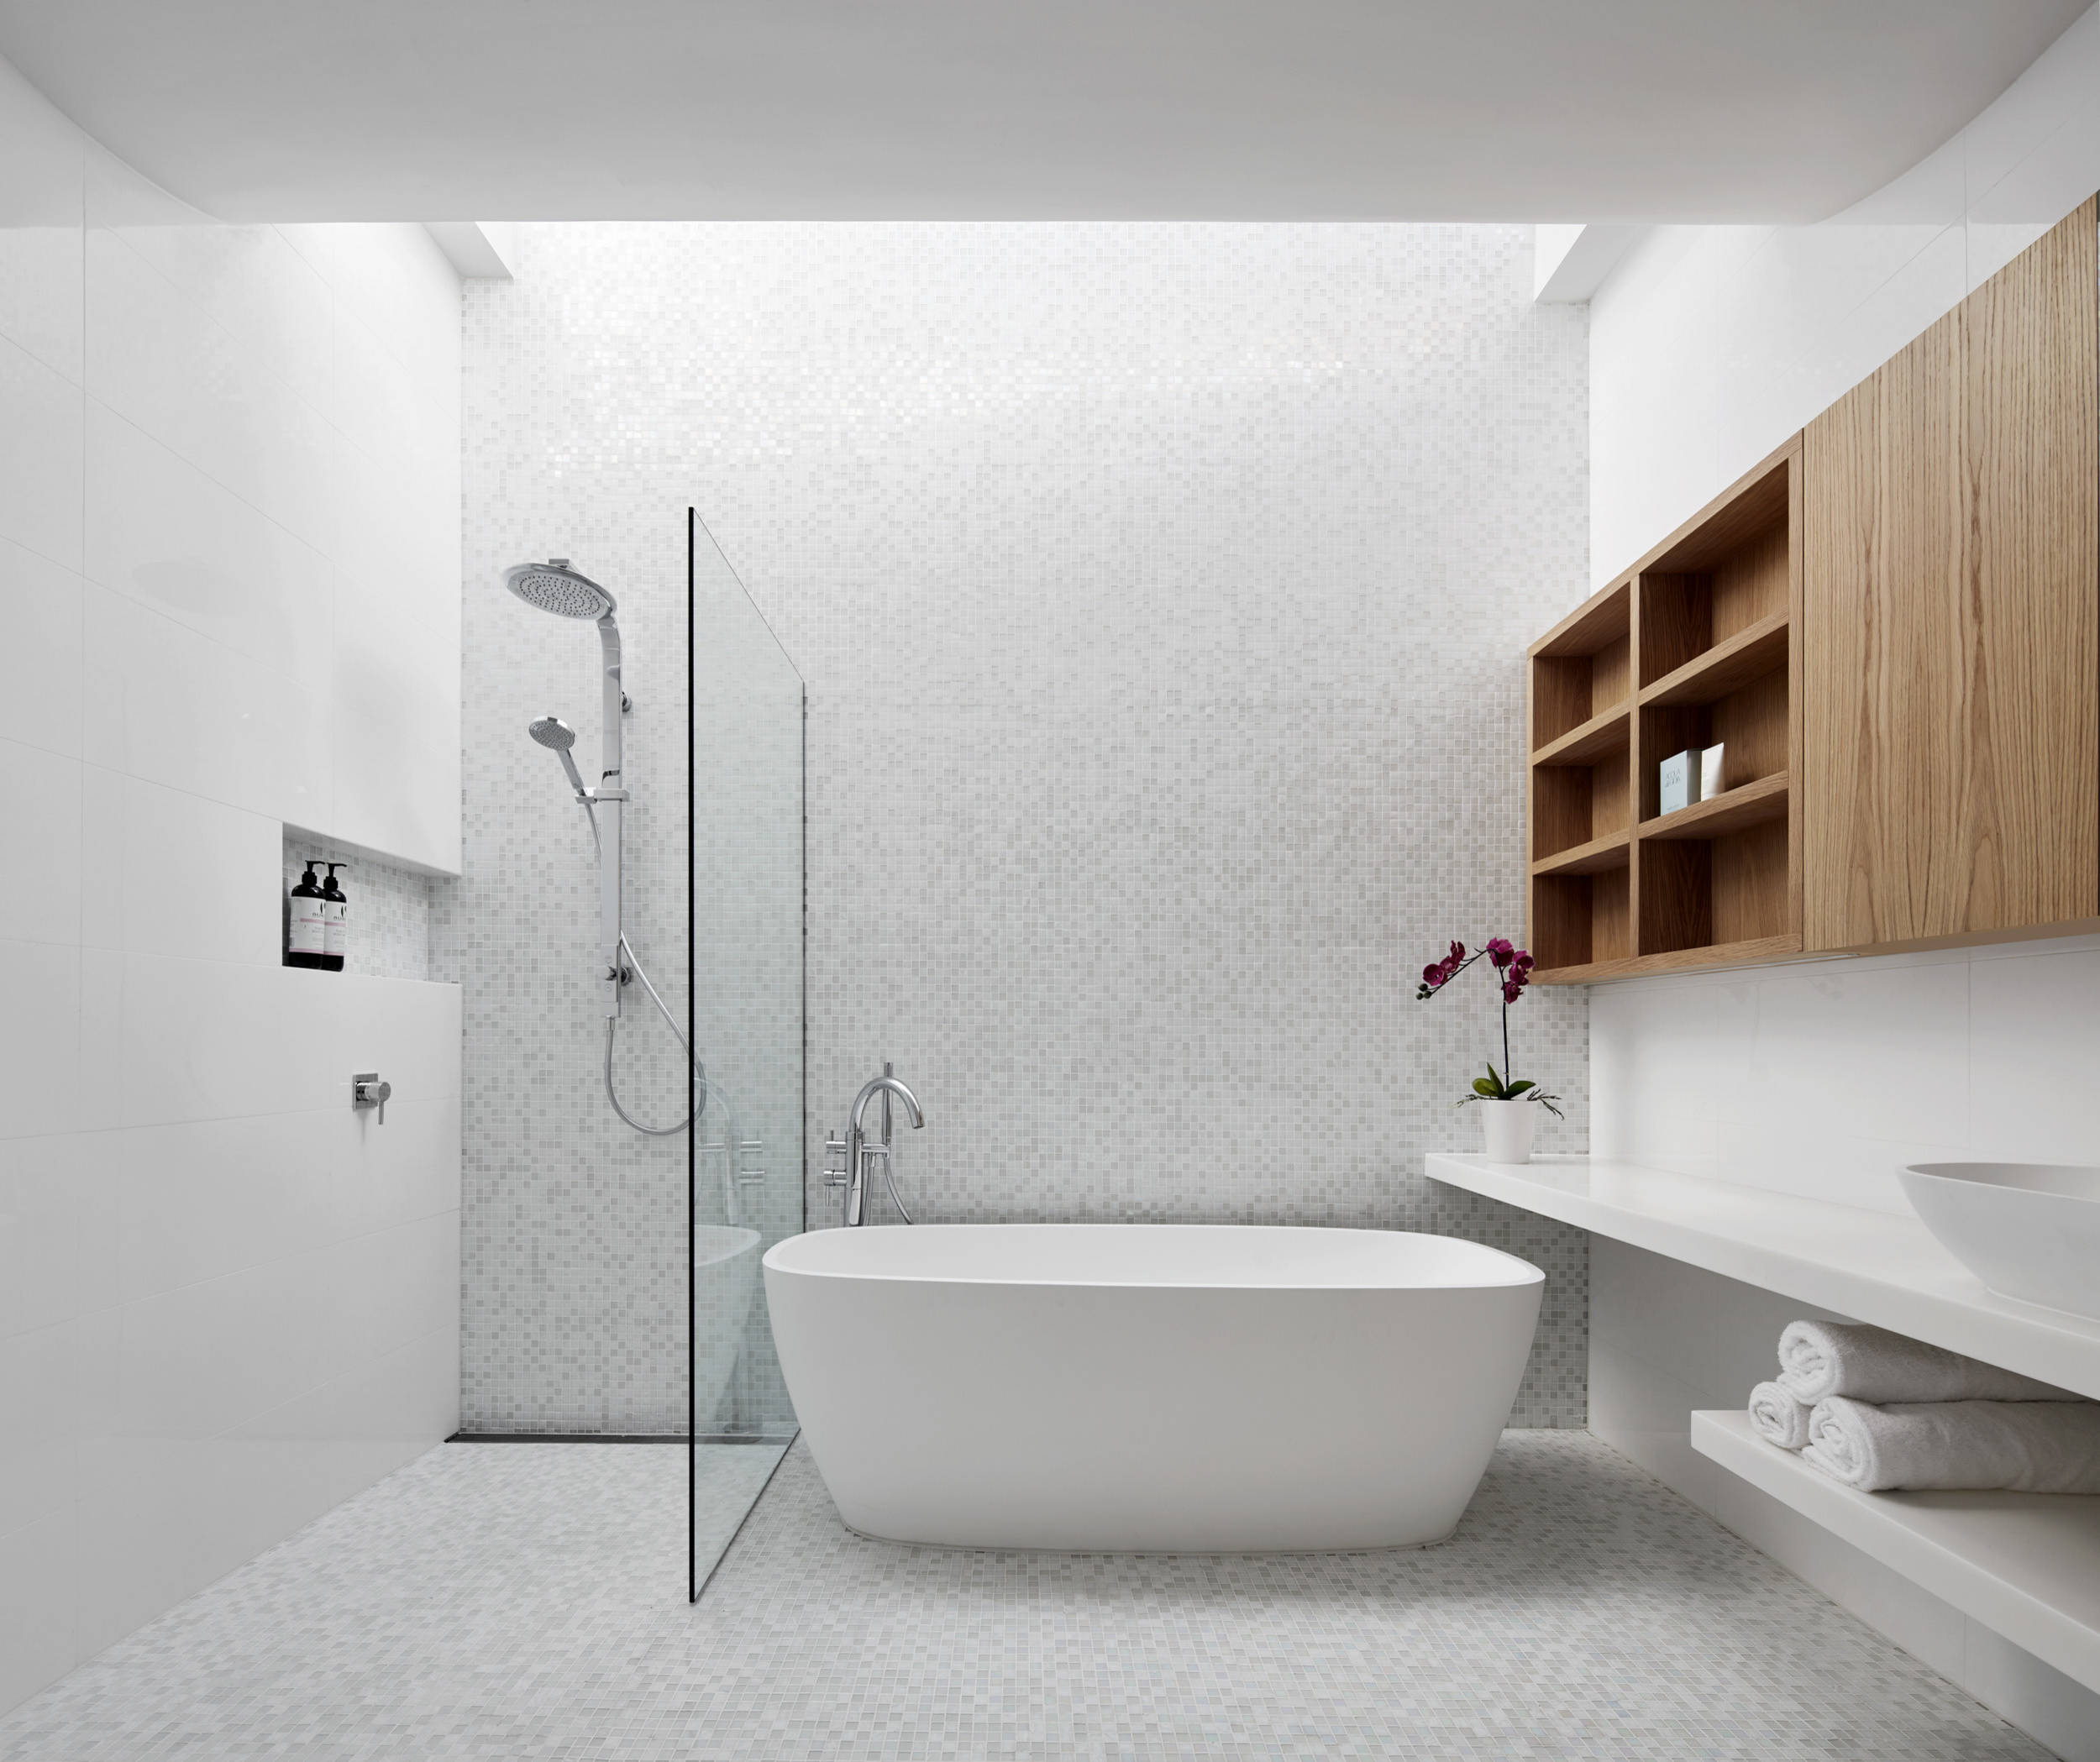 Bathrooms on a Budget | 11 Renovation Ideas for under $5,000 | Houzz AU